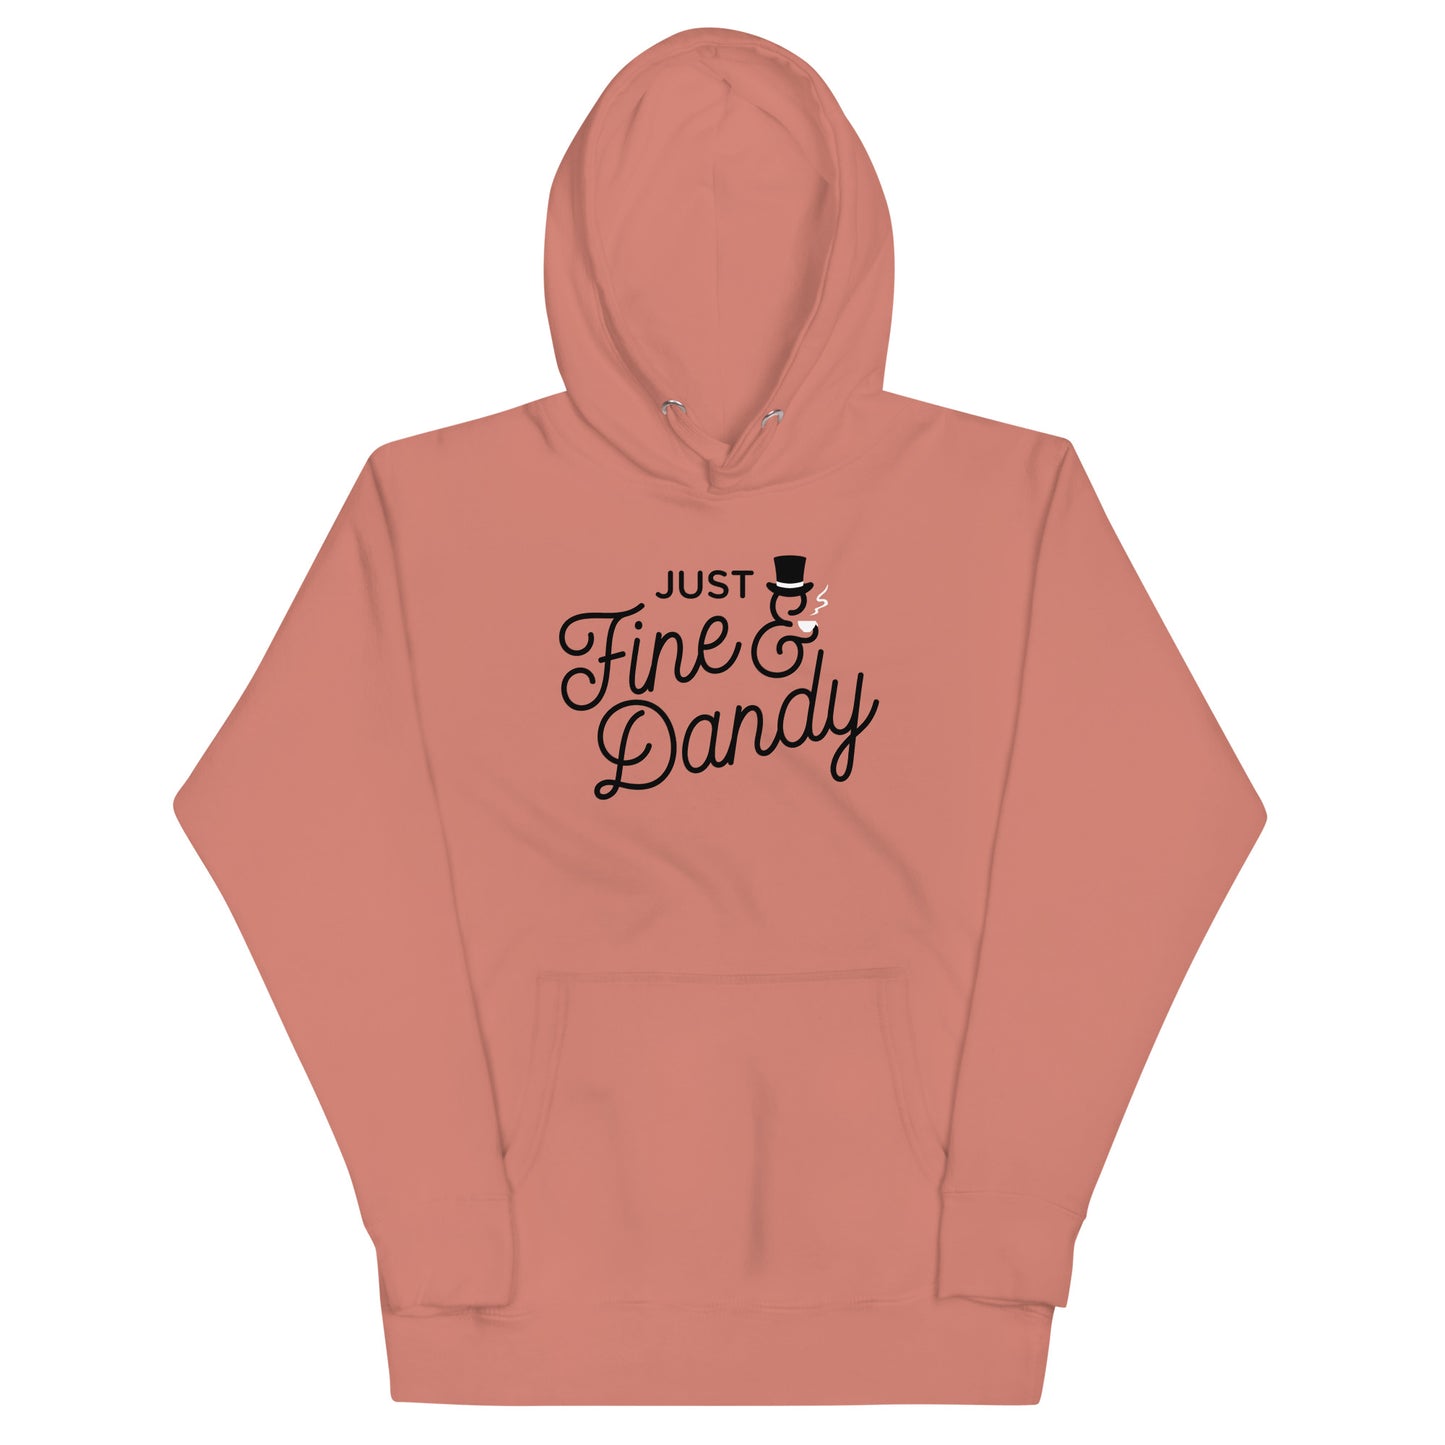 Just Fine And Dandy Unisex Hoodie